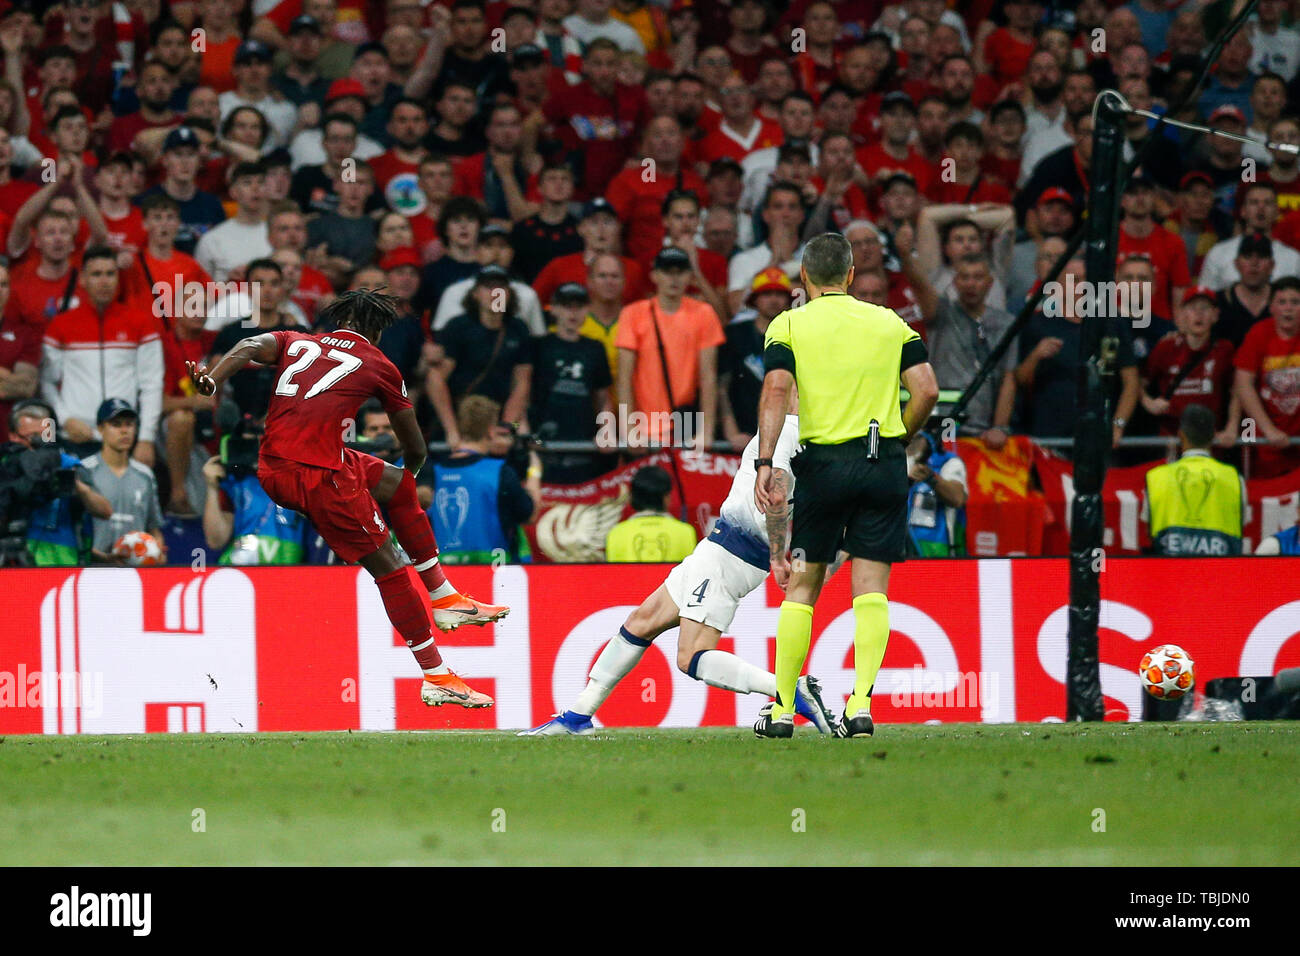 Madrid, Spain. 01st June, 2019. Divock Origi of Liverpool scores his side's  second goal to make the score 2-0 during the UEFA Champions League Final  match between Tottenham Hotspur and Liverpool at